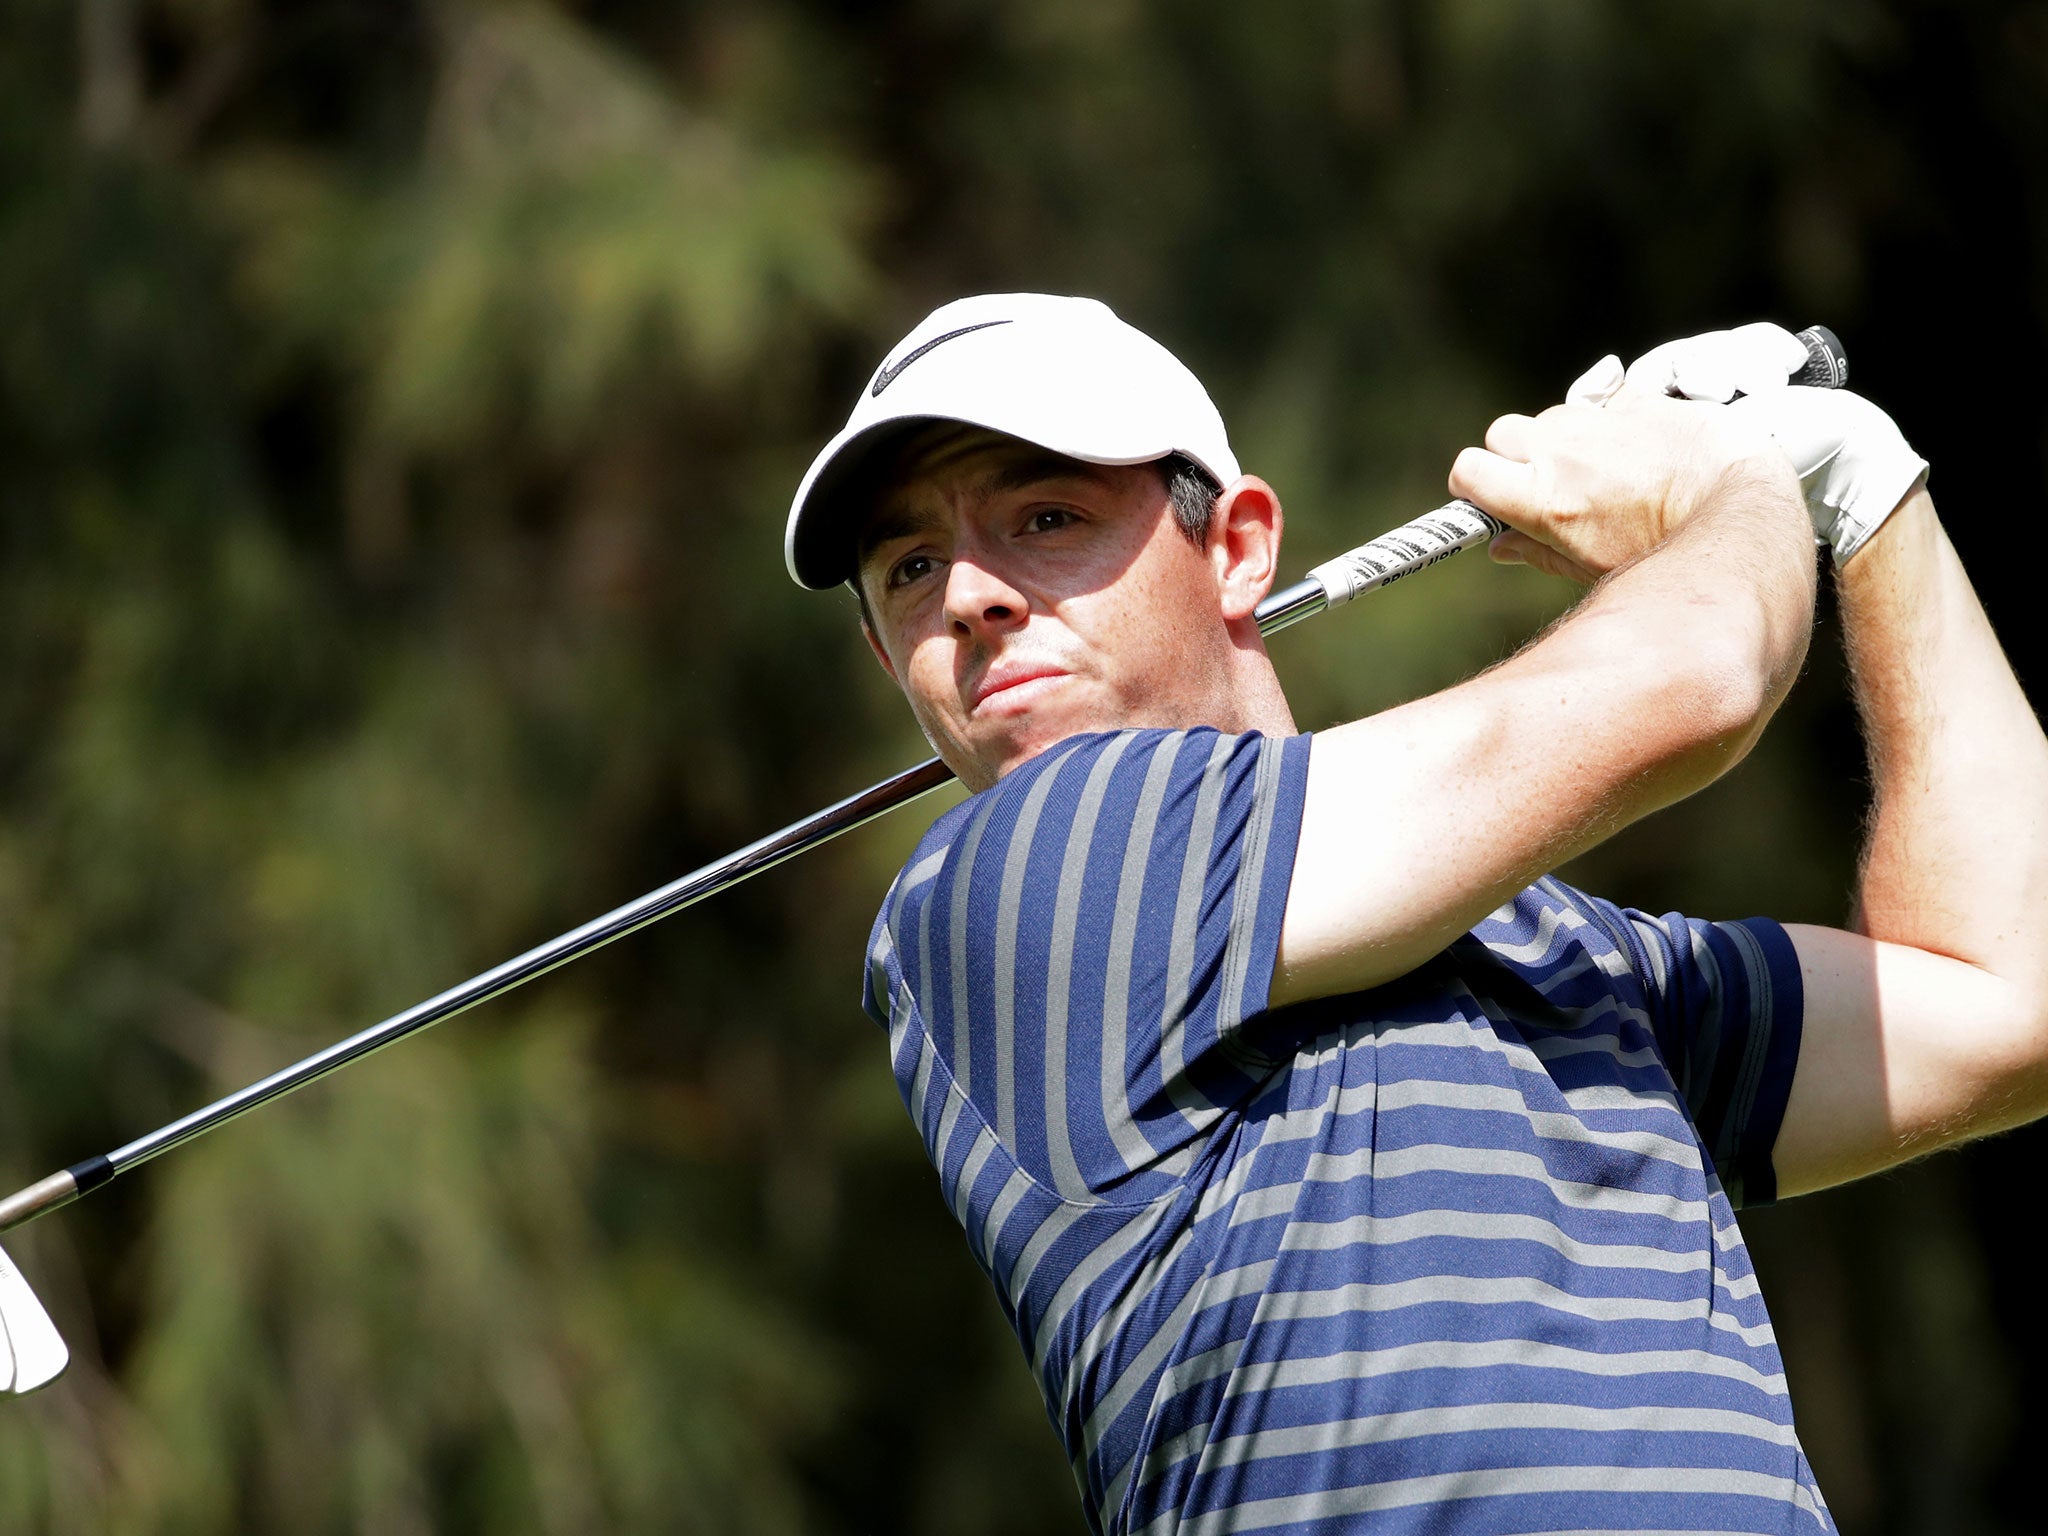 Rory McIlroy leads after two rounds at the WGC Mexico Championship